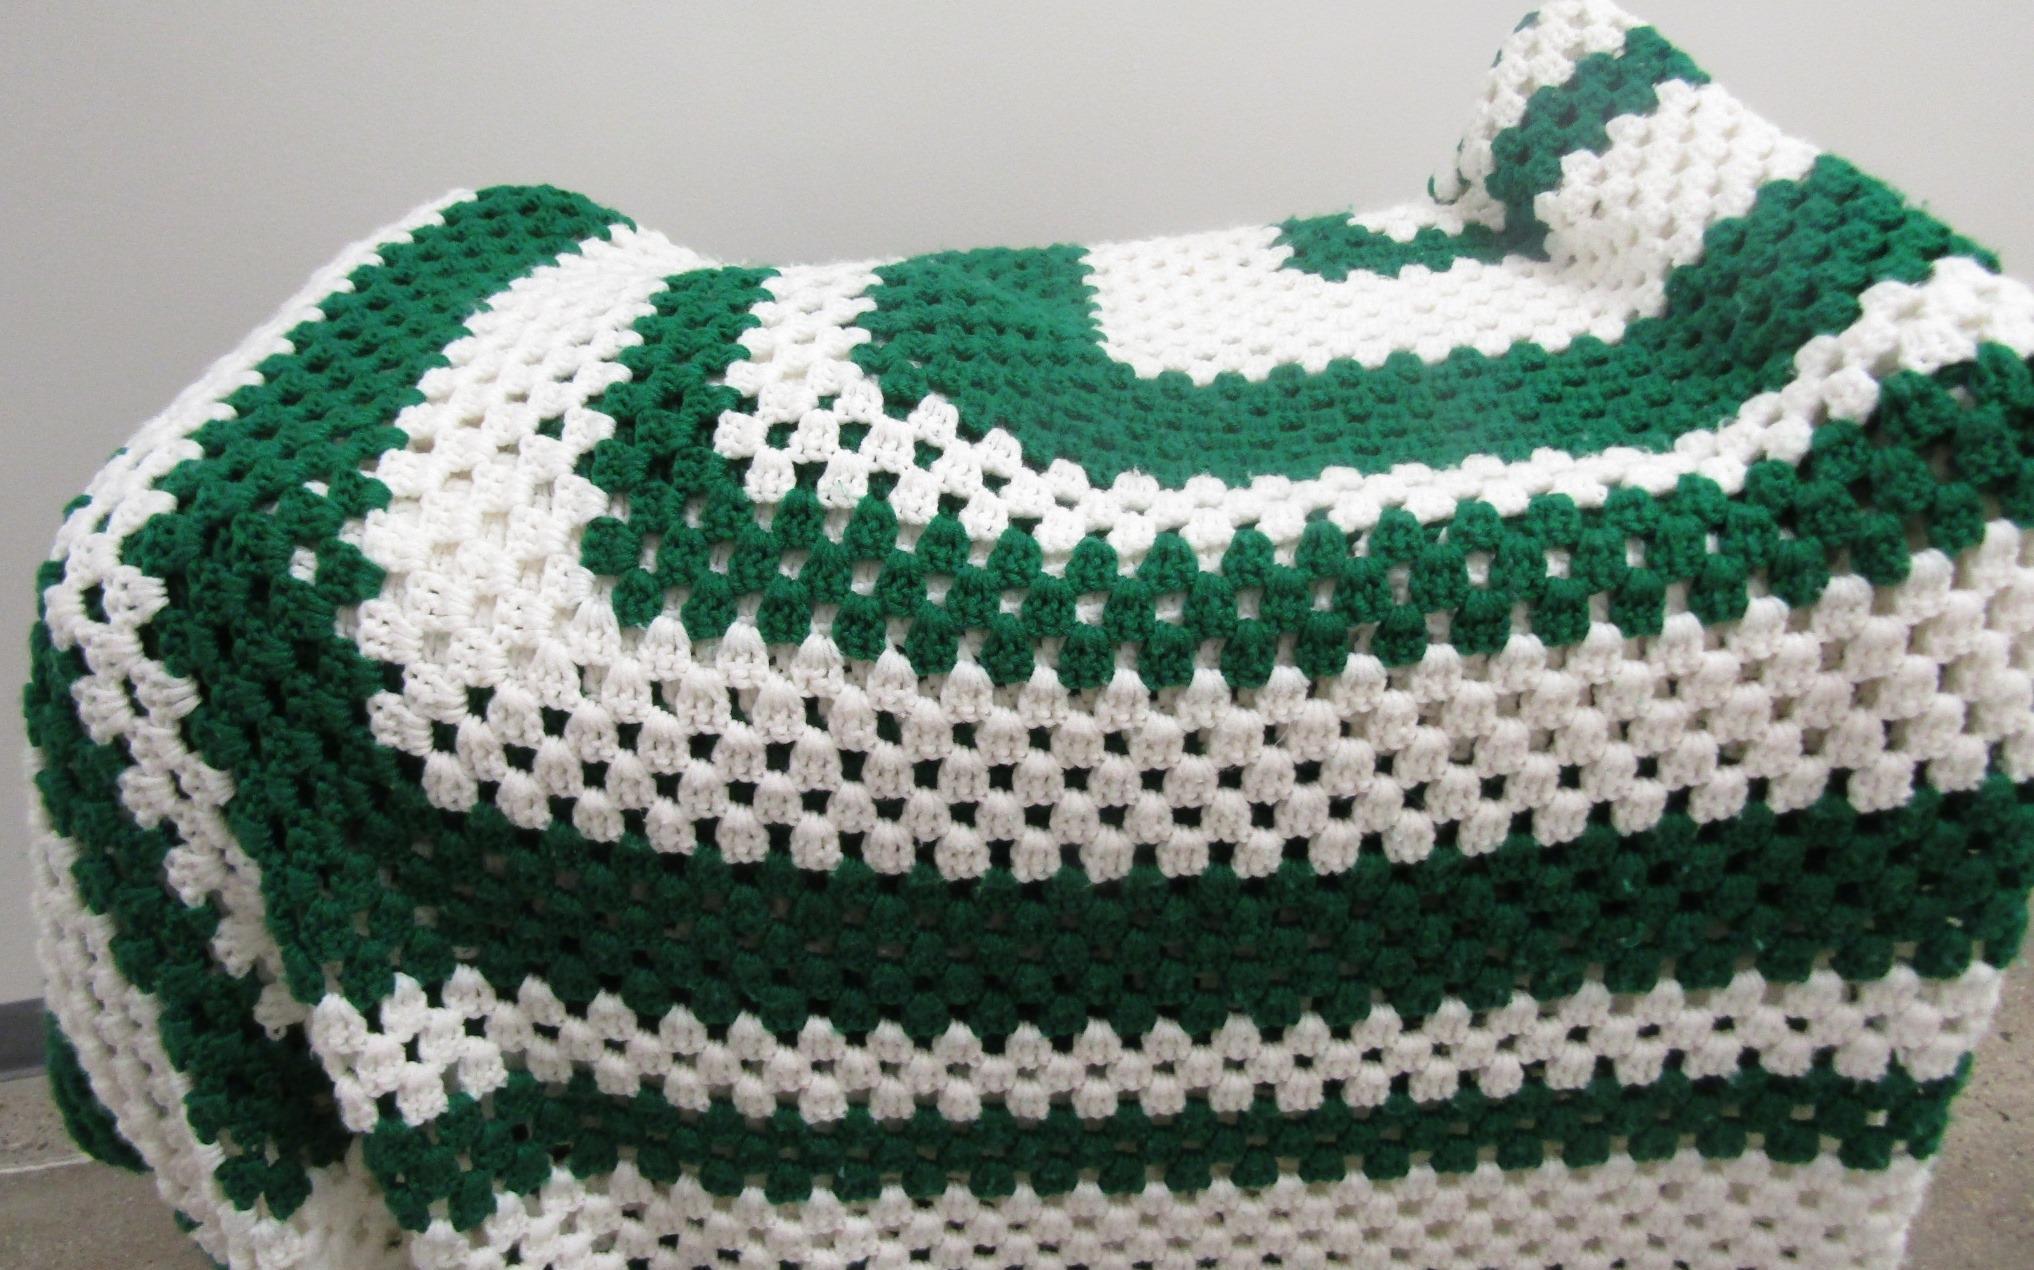 1974 Full or Double Green & White Hand-Knit Afghan Bedspread Coverlet (80” x 92”)